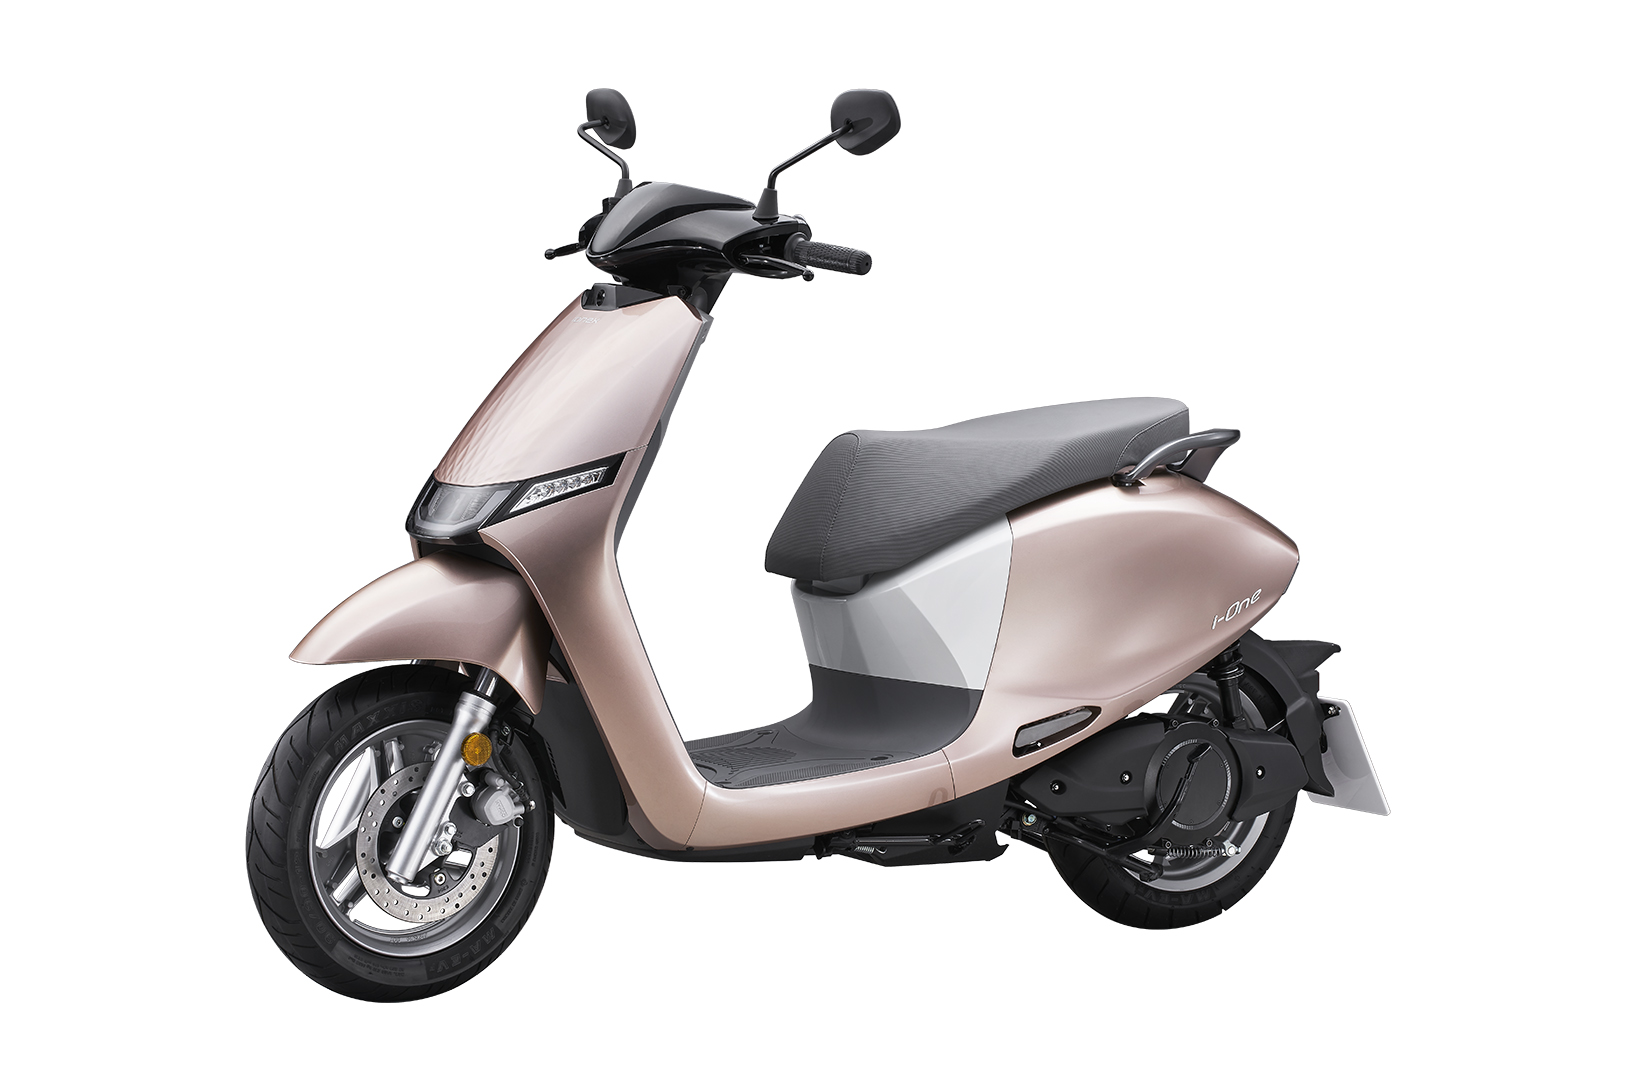 Kymco announce electric i-One scooter to be broug...